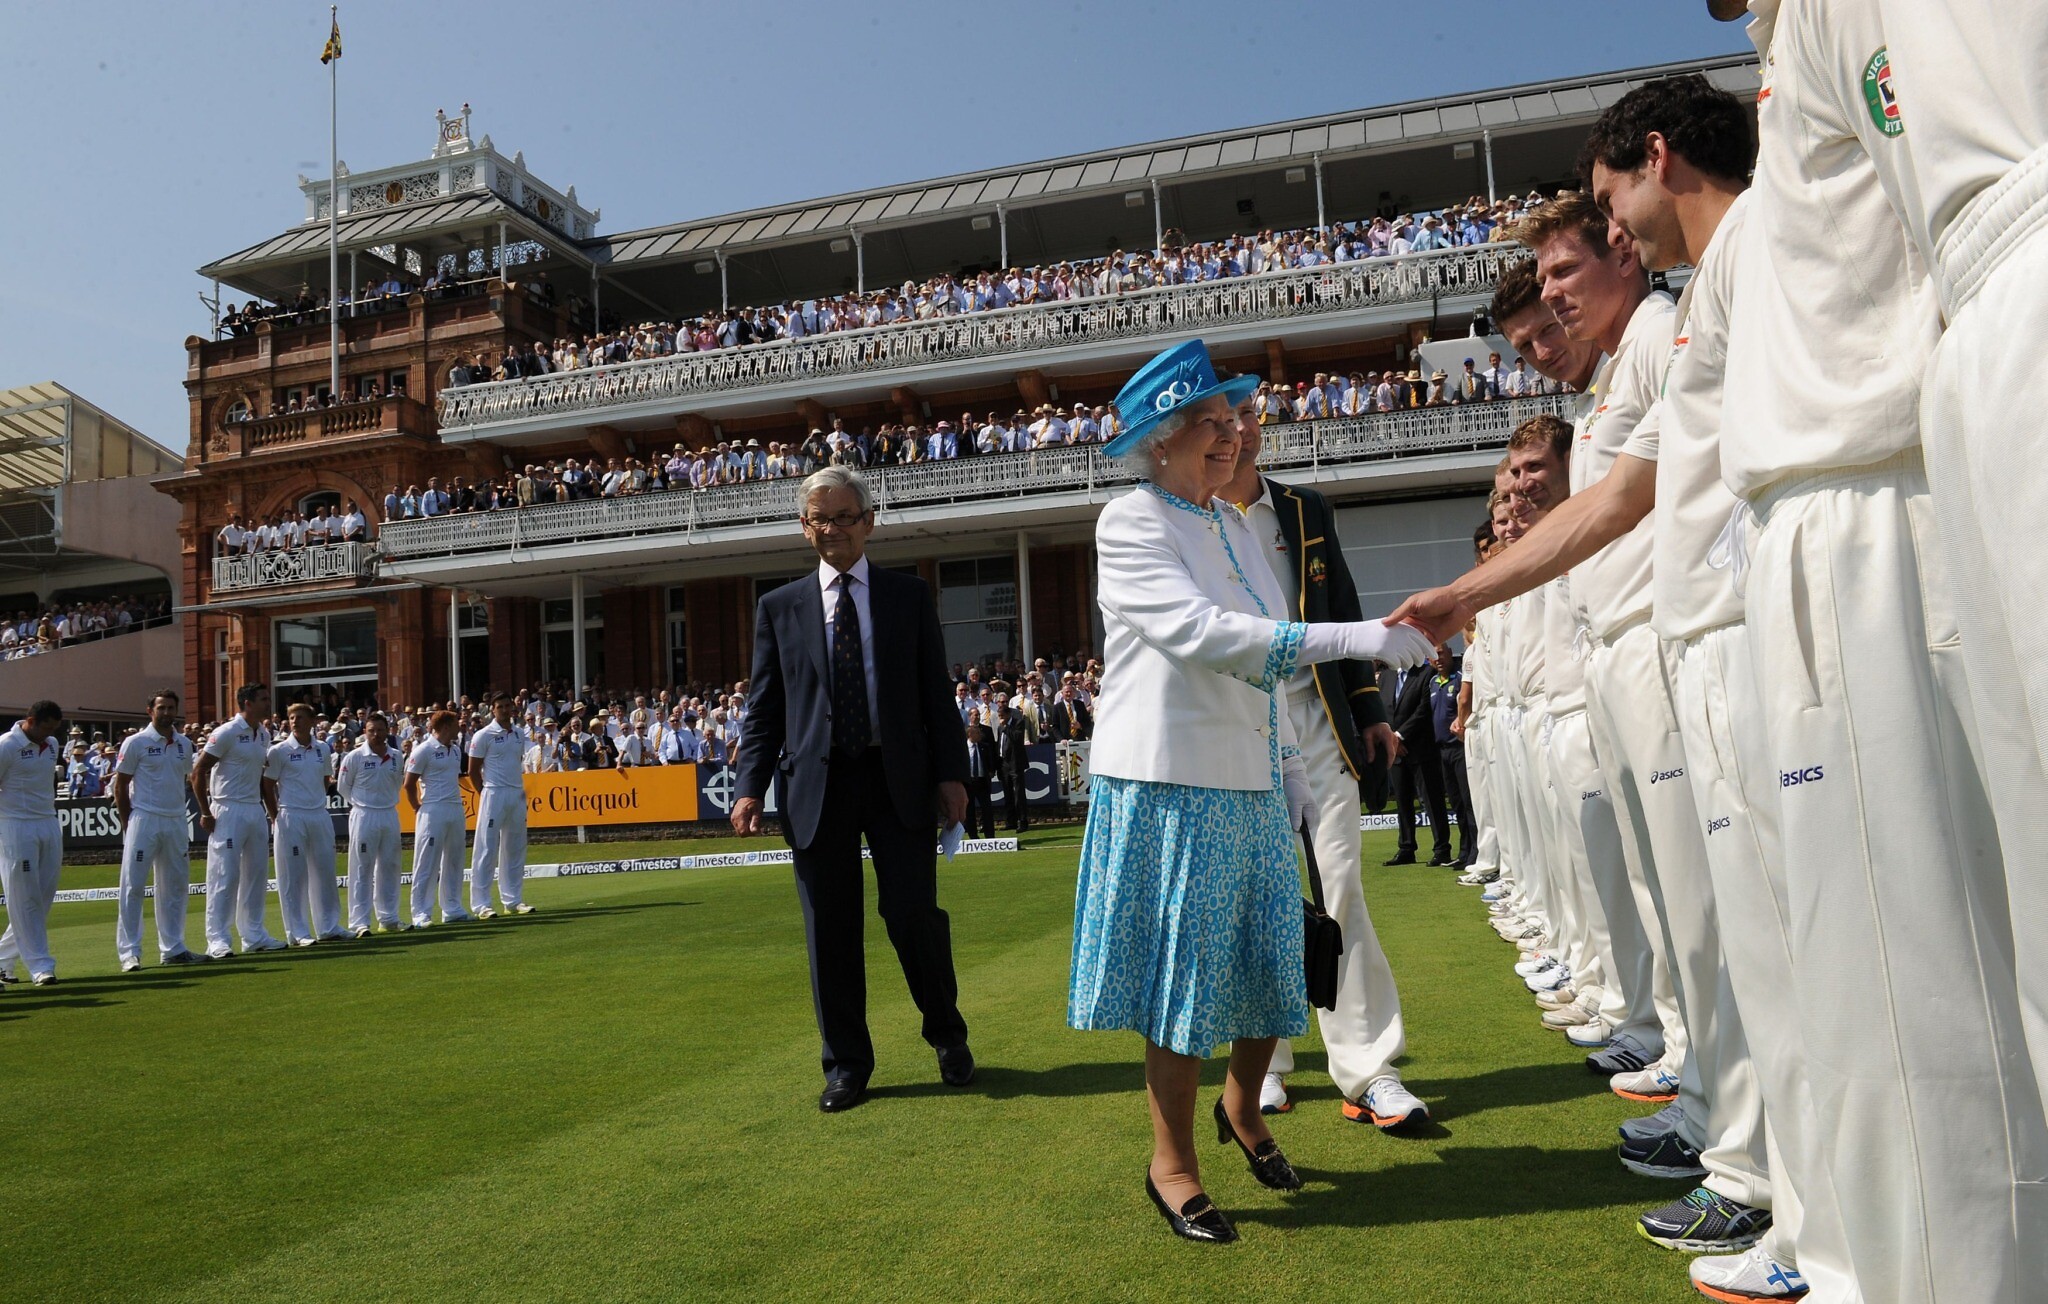 Cricket plays tribute to the Queen as fans bash UK soccer for scrapping games The Times of Israel